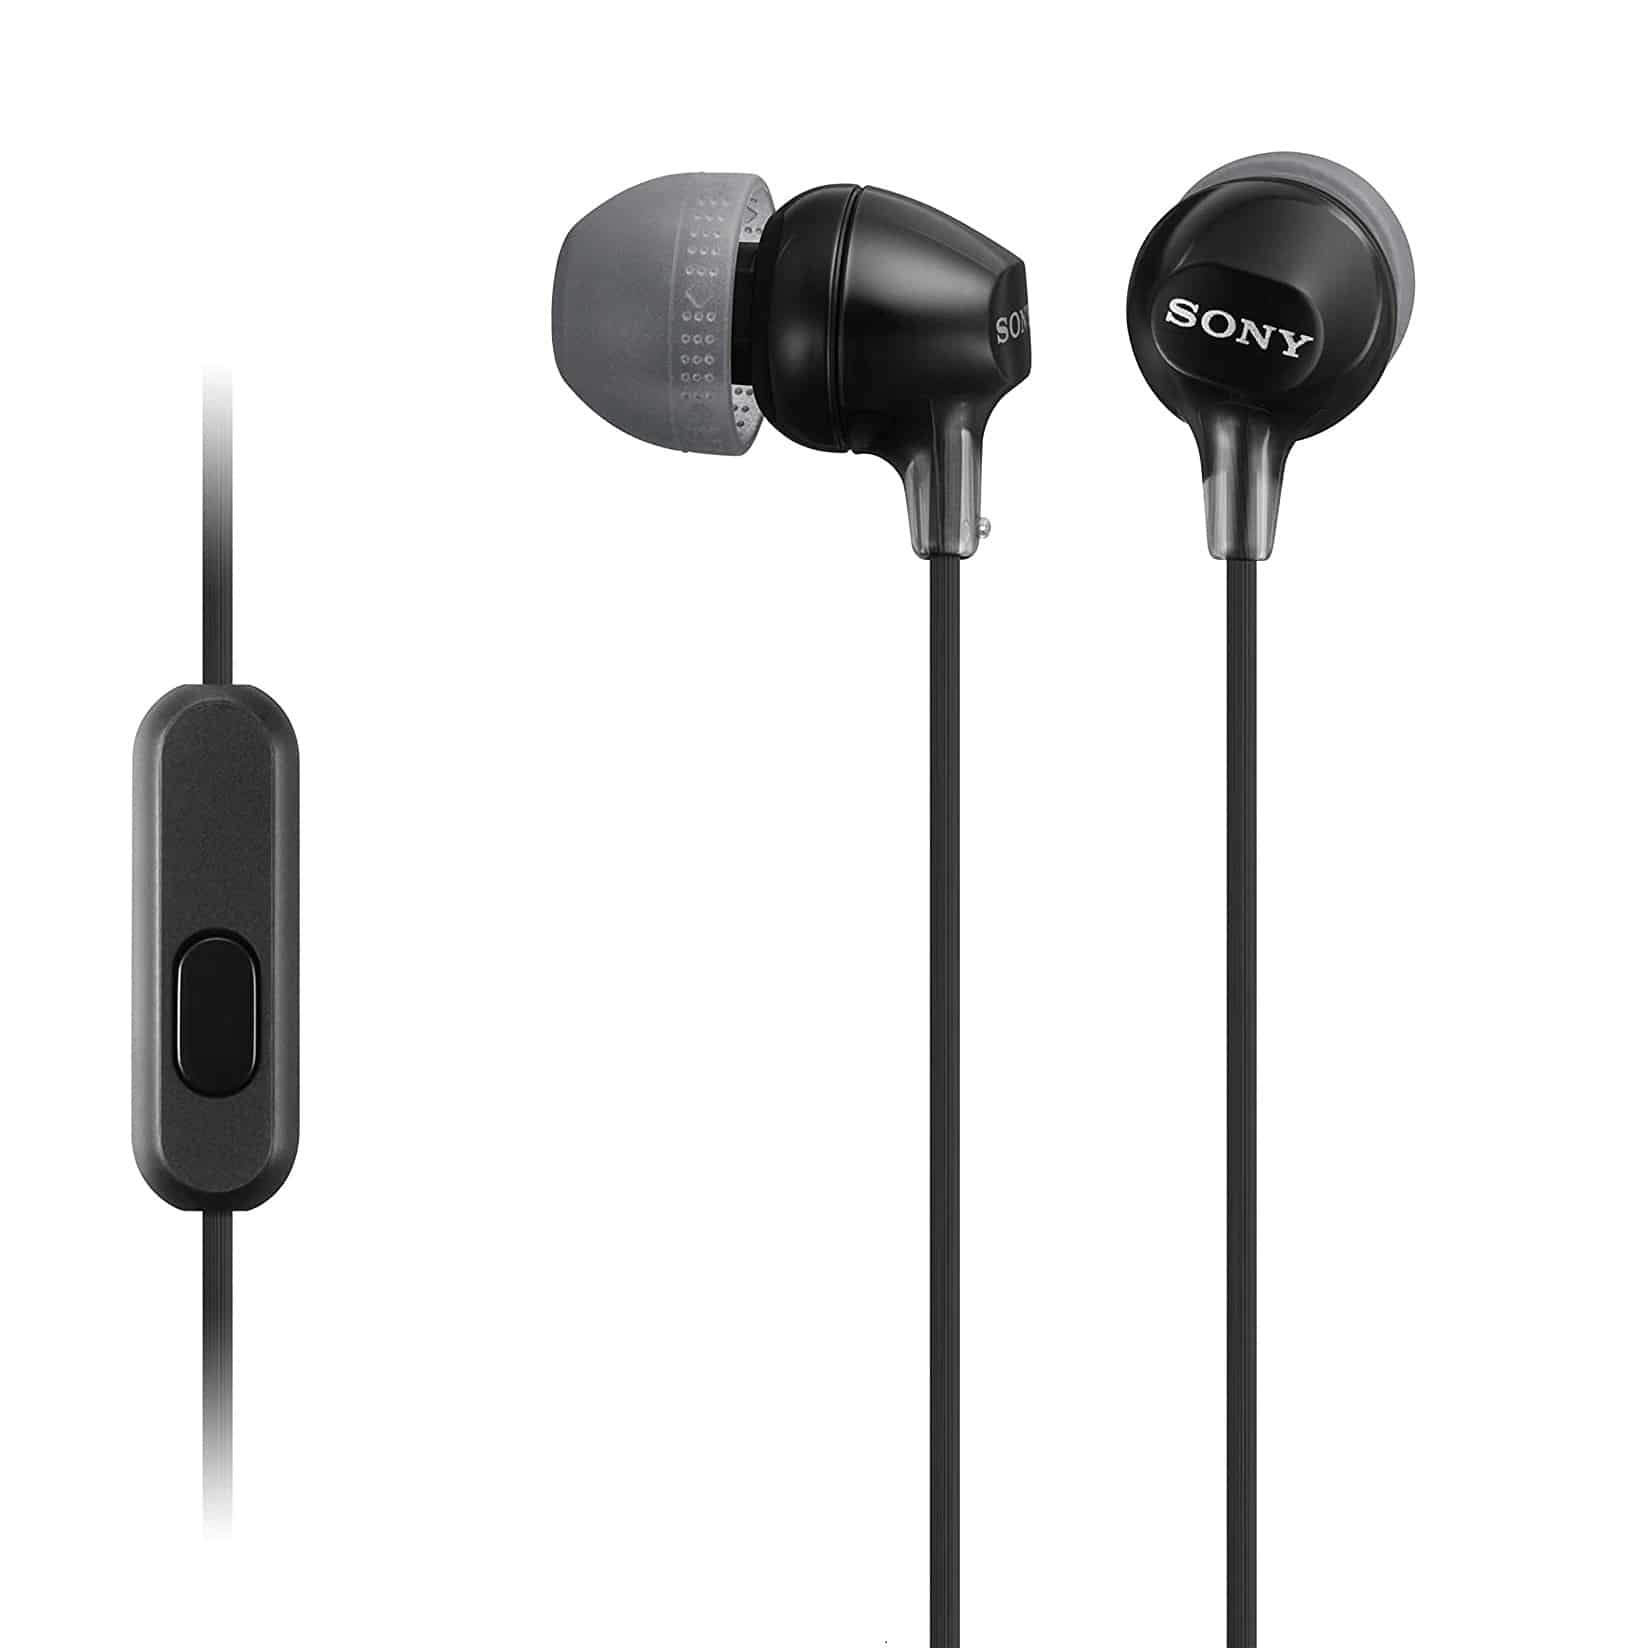 Sony MDREX15AP In-Ear Earbud with Mic – Black Audio  |  Earbuds  |  Wired Earbuds  |